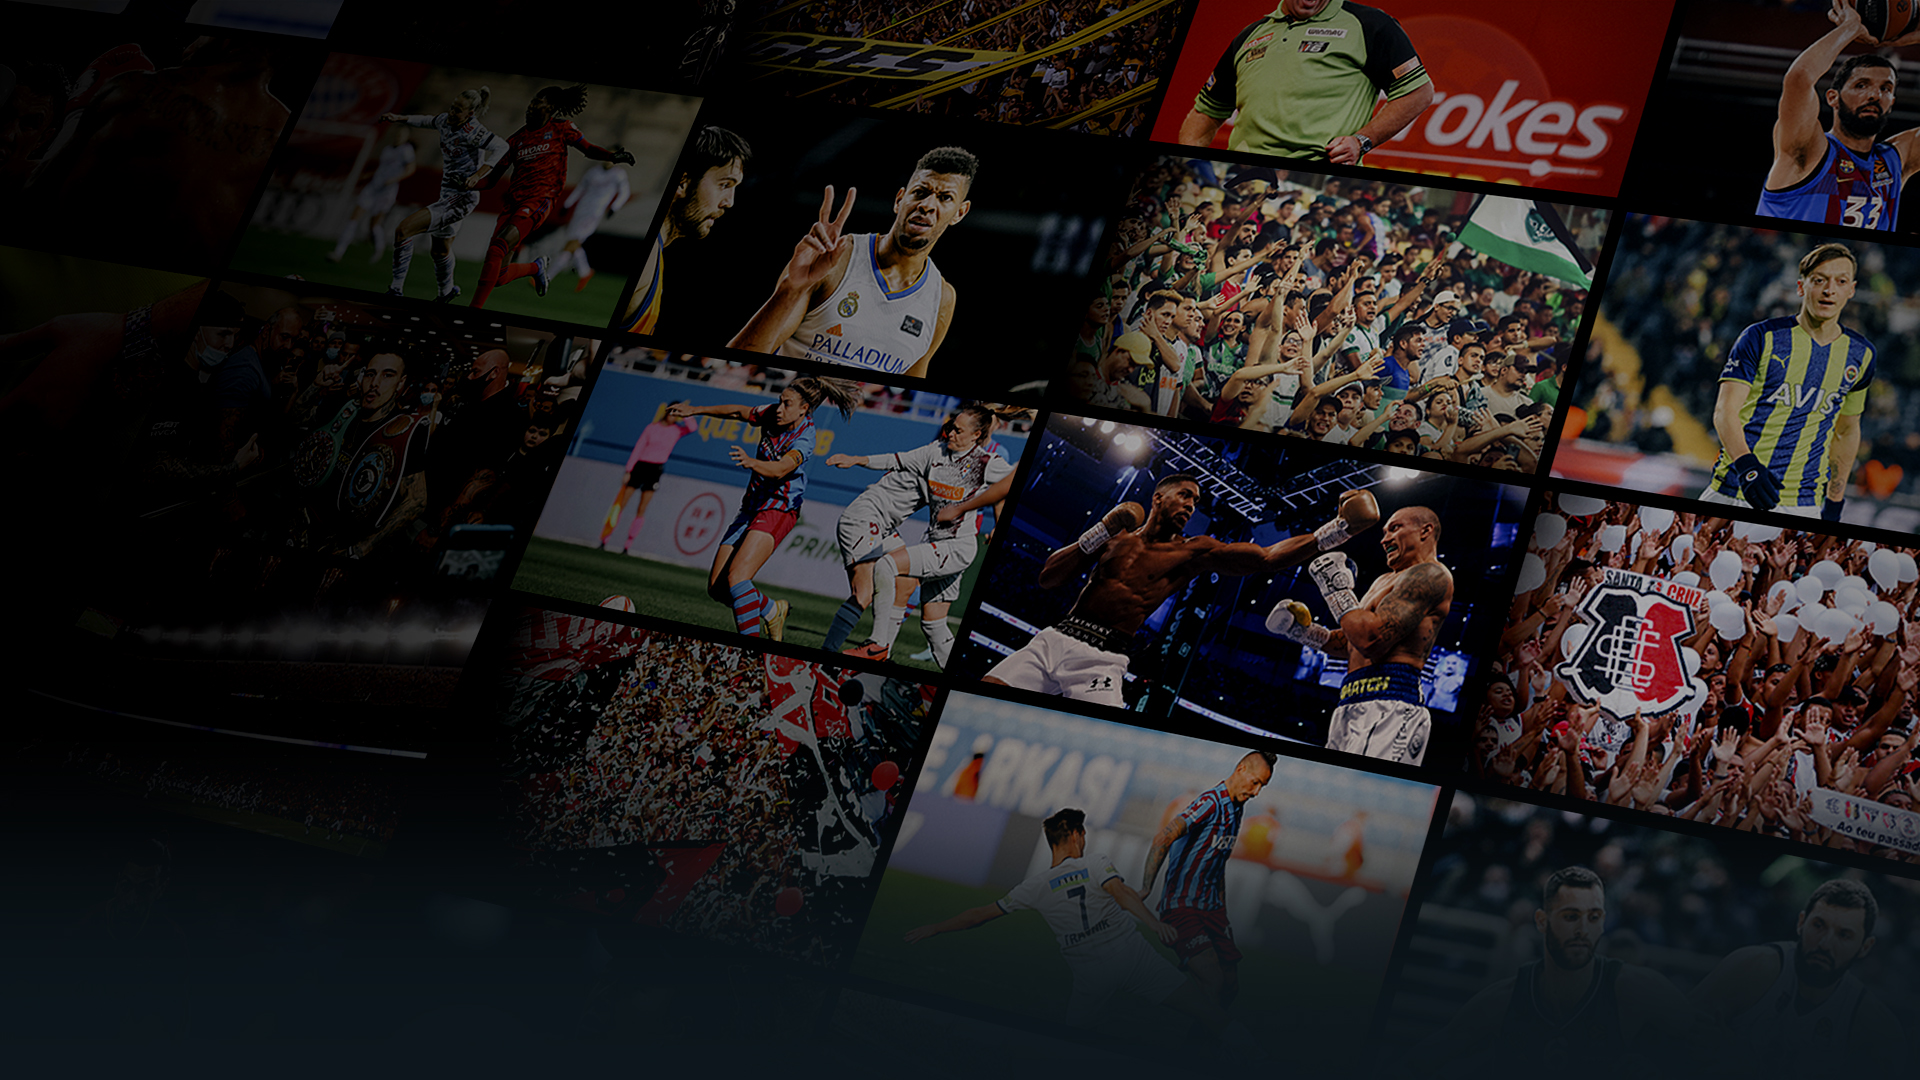 live sports streaming